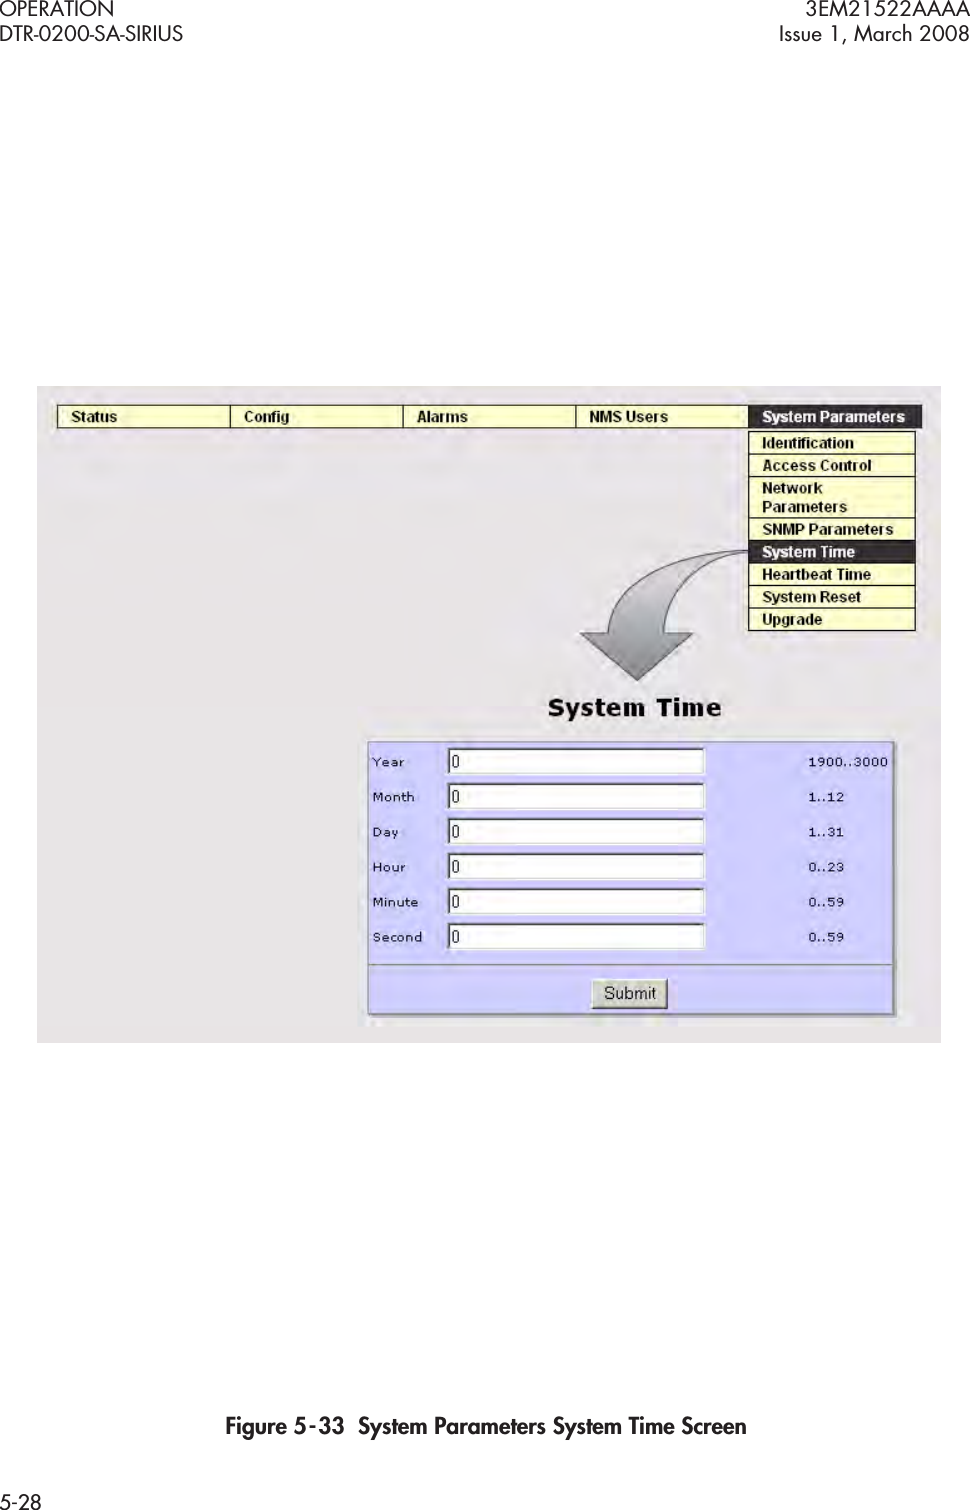 OPERATION 3EM21522AAAADTR-0200-SA-SIRIUS Issue 1, March 20085-28Figure 5  -  33  System Parameters System Time Screen